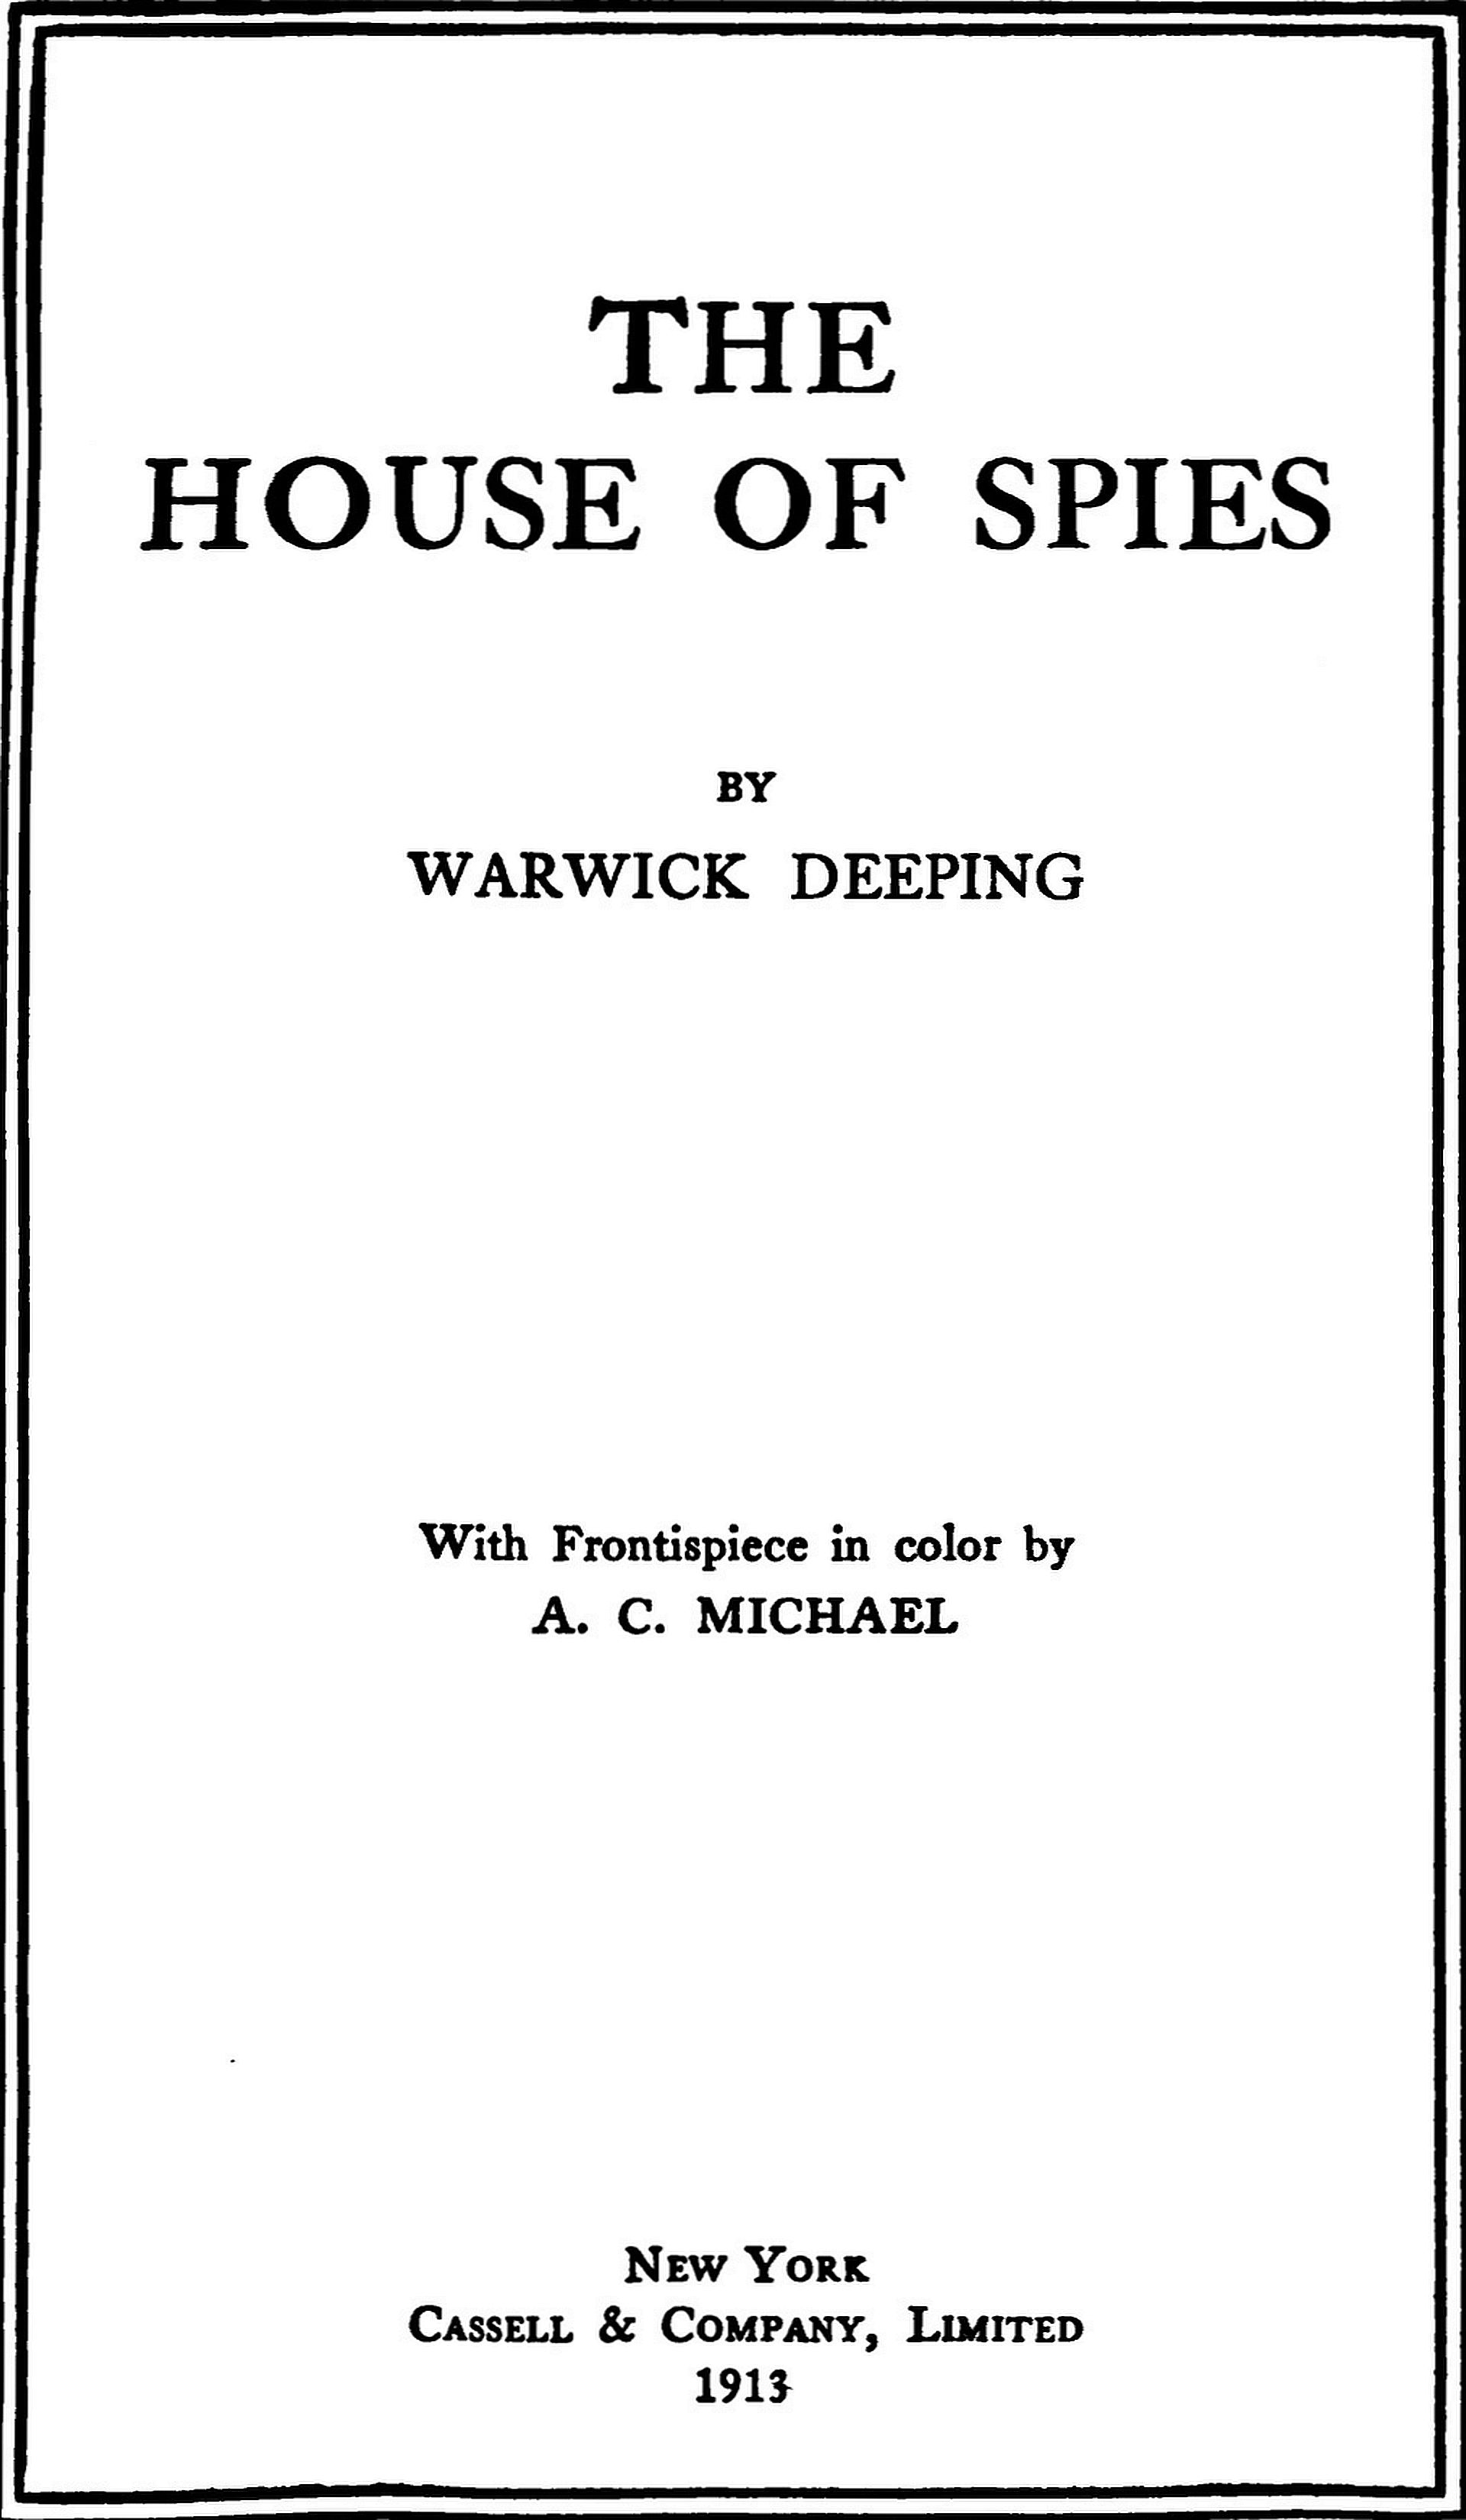 The Project Gutenberg eBook of The House of Spies, by Warwick Deeping.